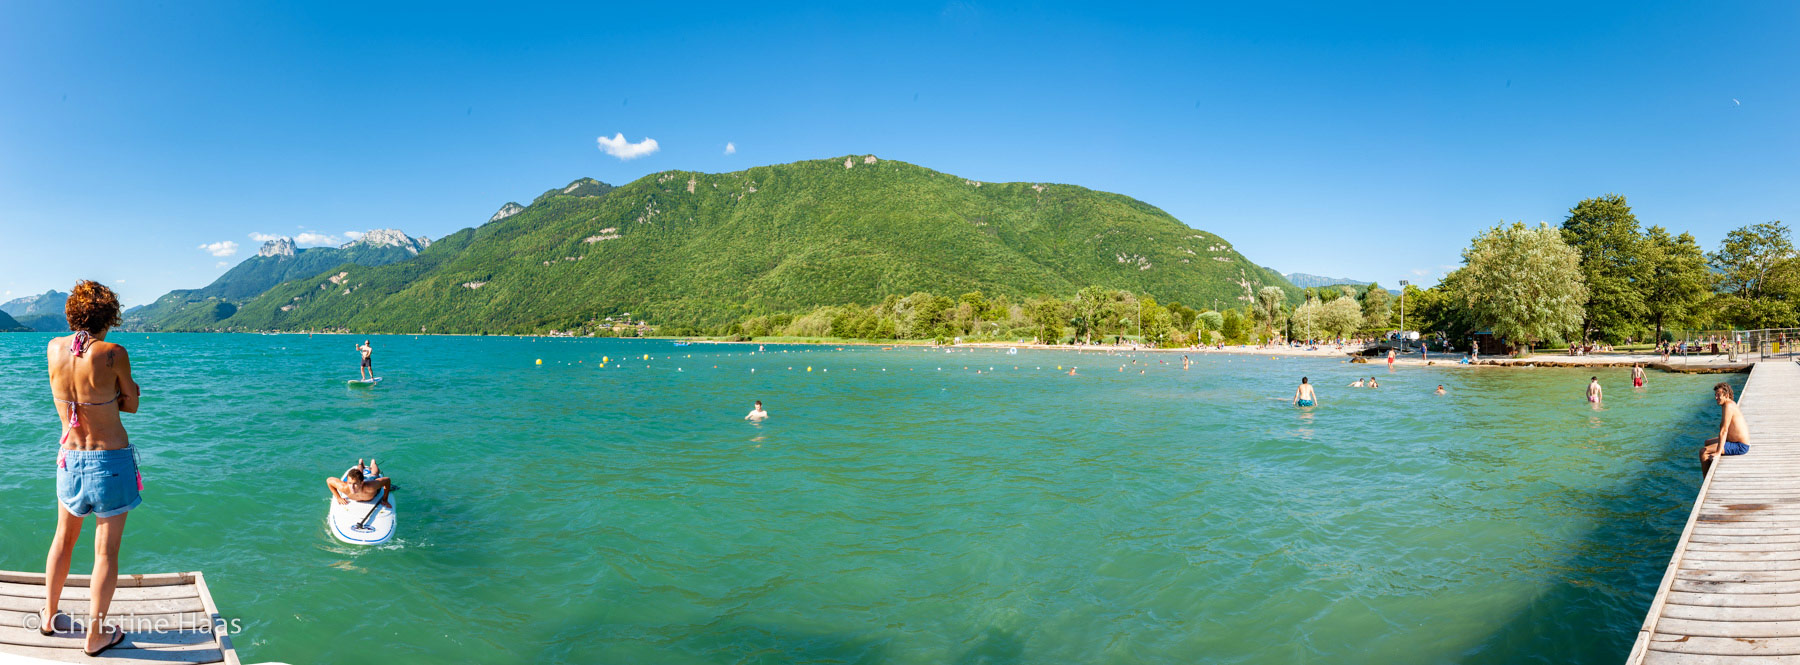 panorama-plage-lac-annecy-doussard-baignade